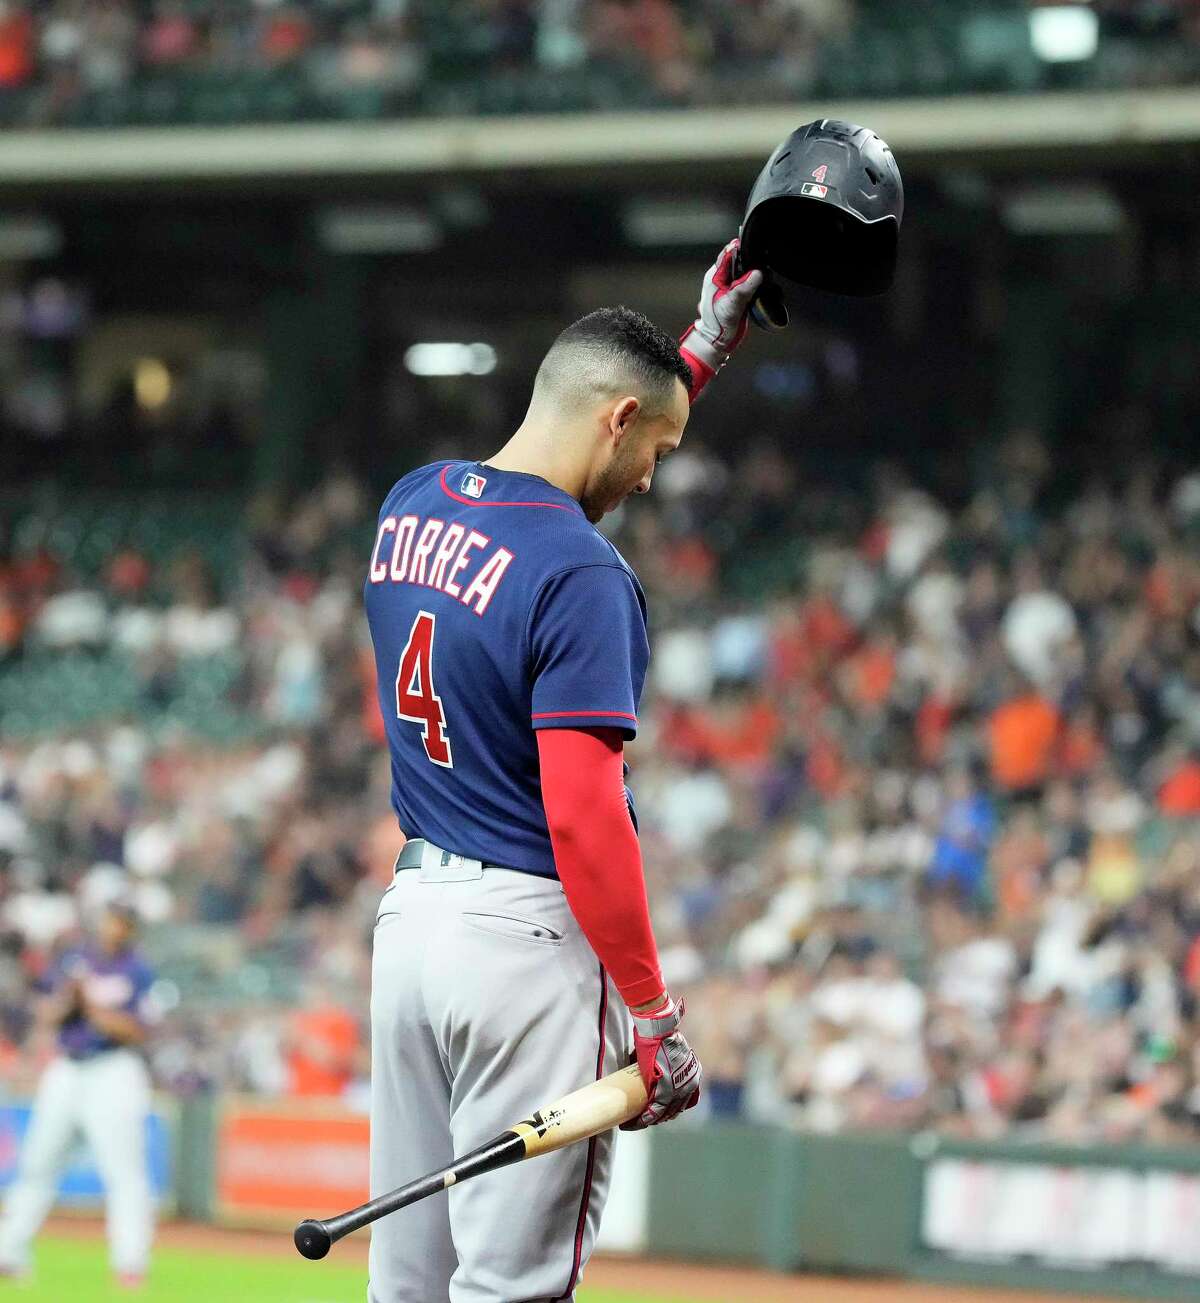 Minnesota Twins Carlos Correa (4) waves to the crowd as he prepared for his at bat against Houston Astros starting pitcher Justin Verlander during the first inning of an MLB baseball game at Minute Maid Park on Tuesday, Aug. 23, 2022 in Houston.